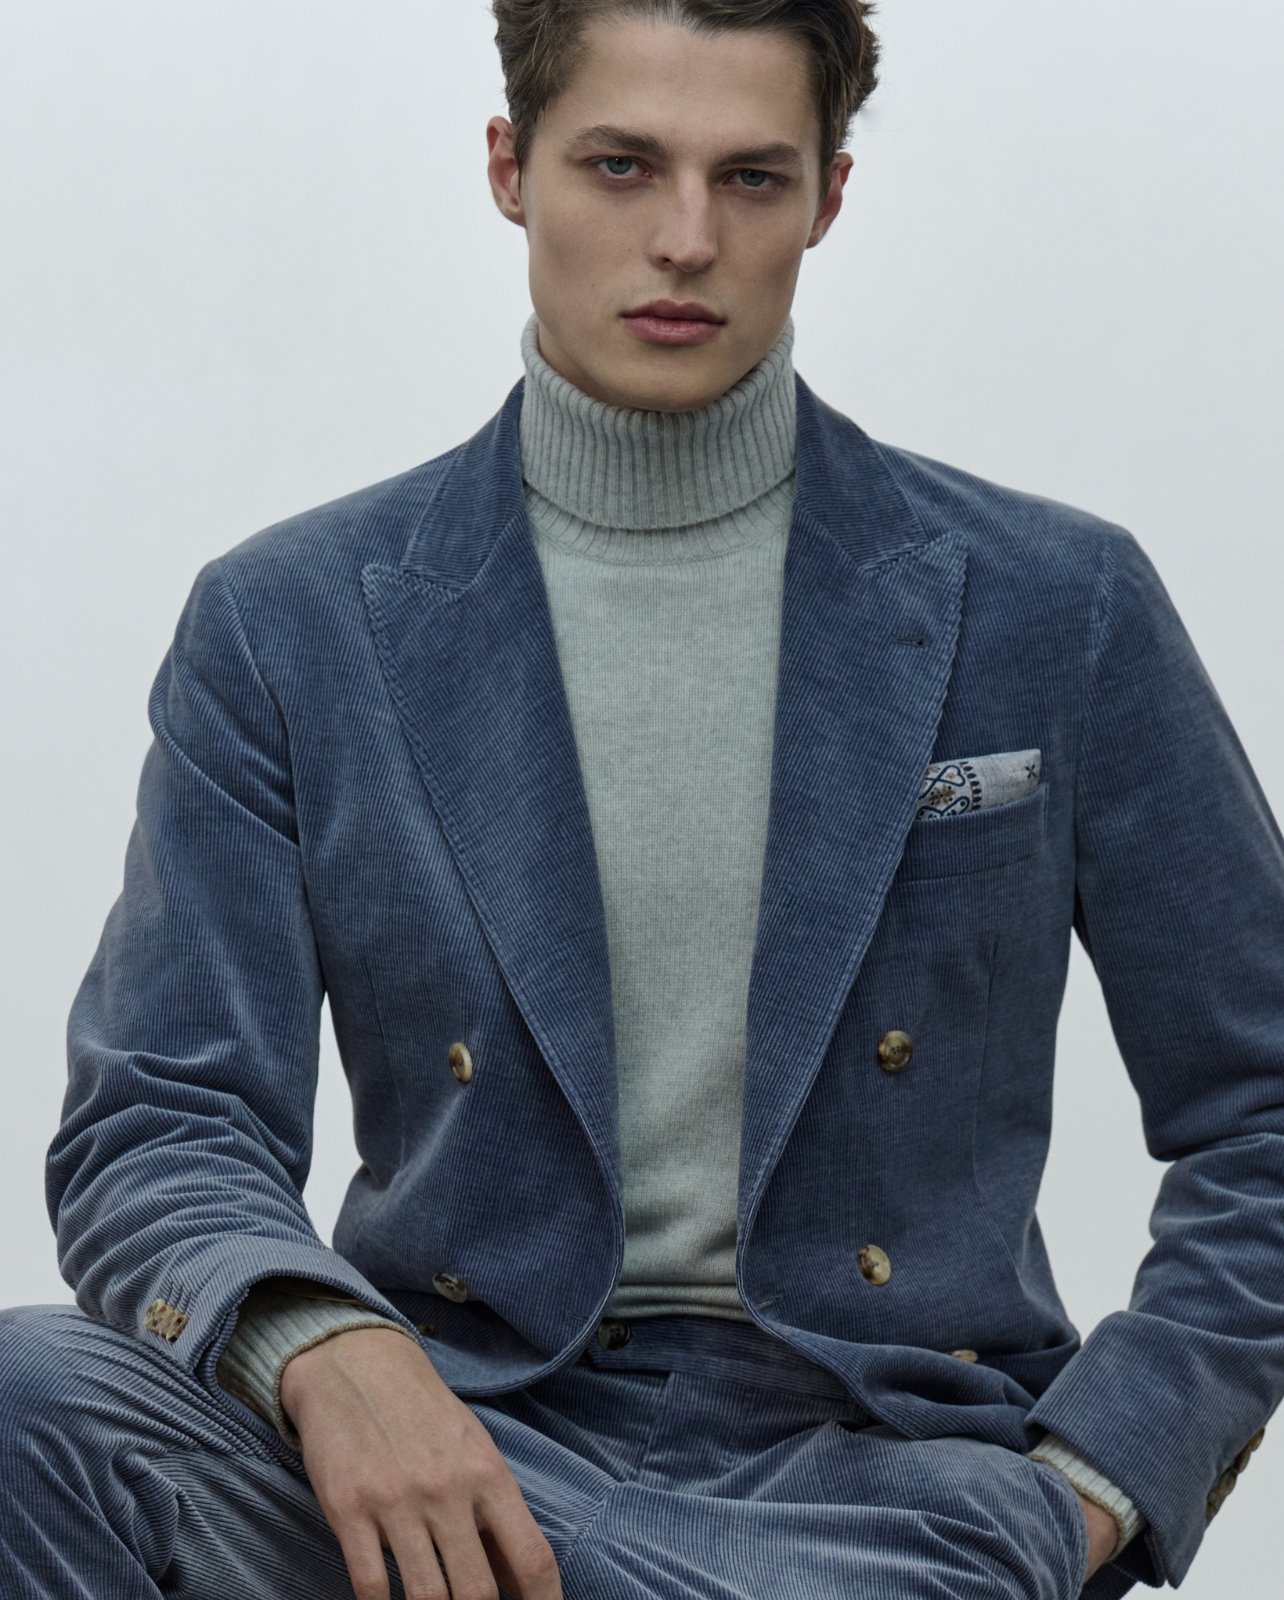 Model dressed in a Brunello Cucinelli blue suit and gray turtleneck